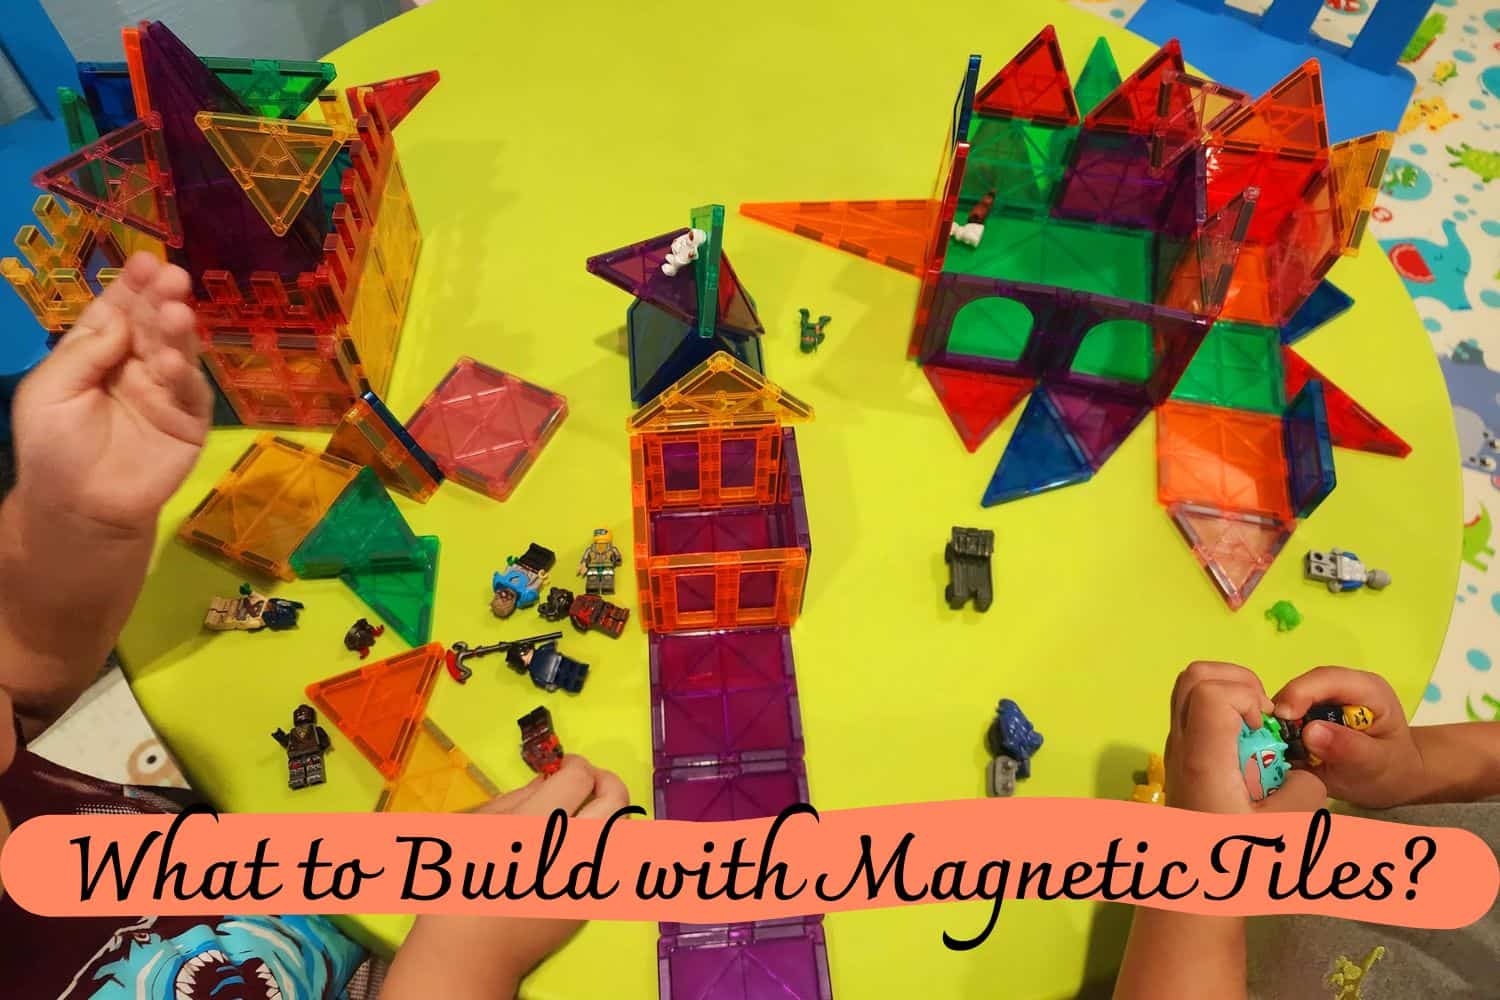 What to Build with Magnetic Tiles?